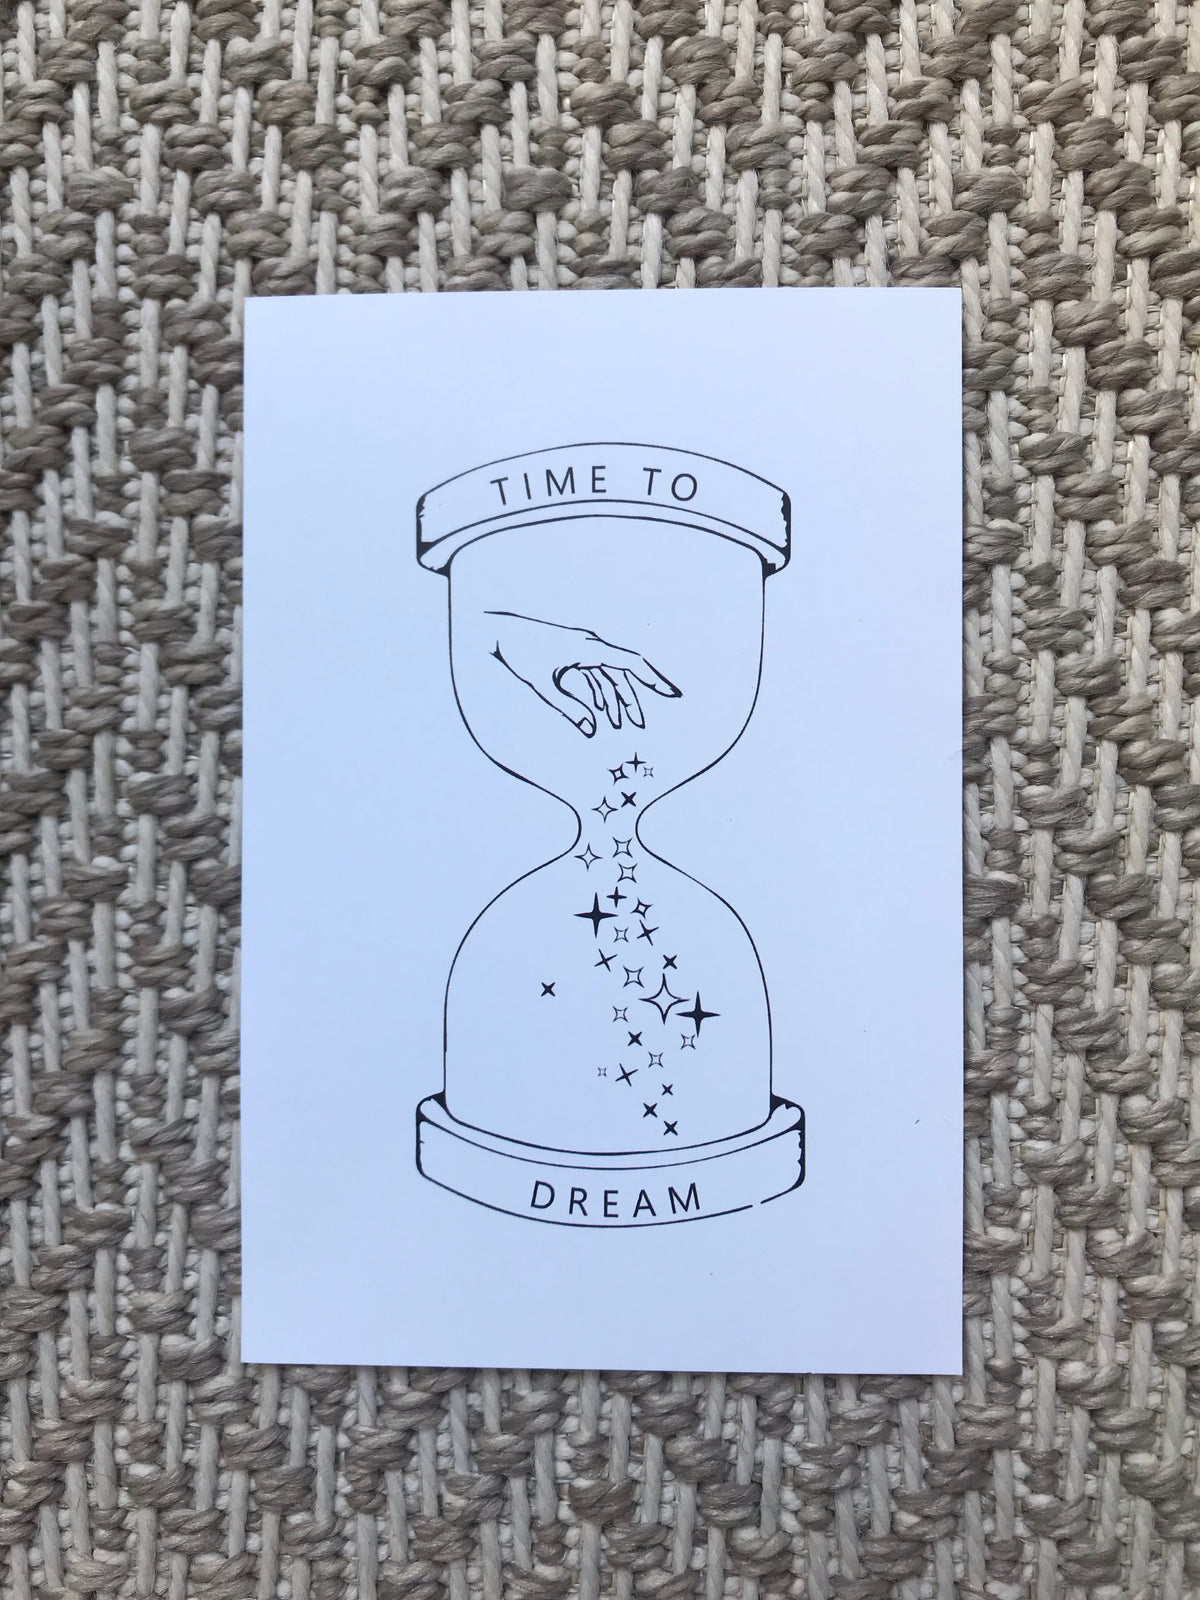 TIME TO DREAM - Illustration